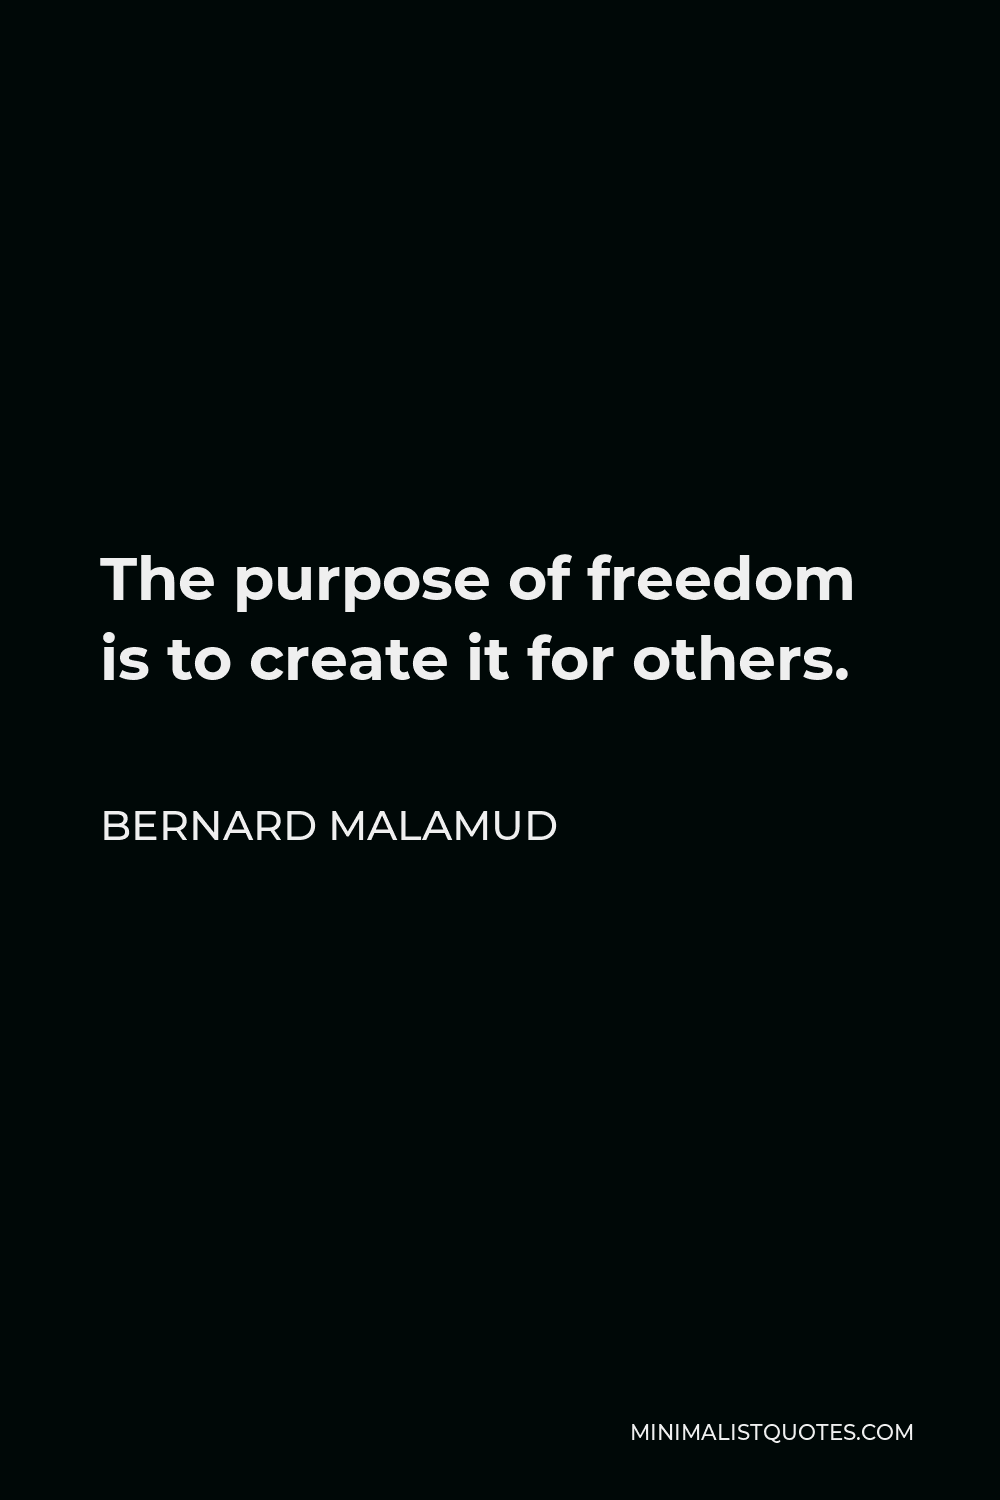 Bernard Malamud Quote - The purpose of freedom is to create it for others.